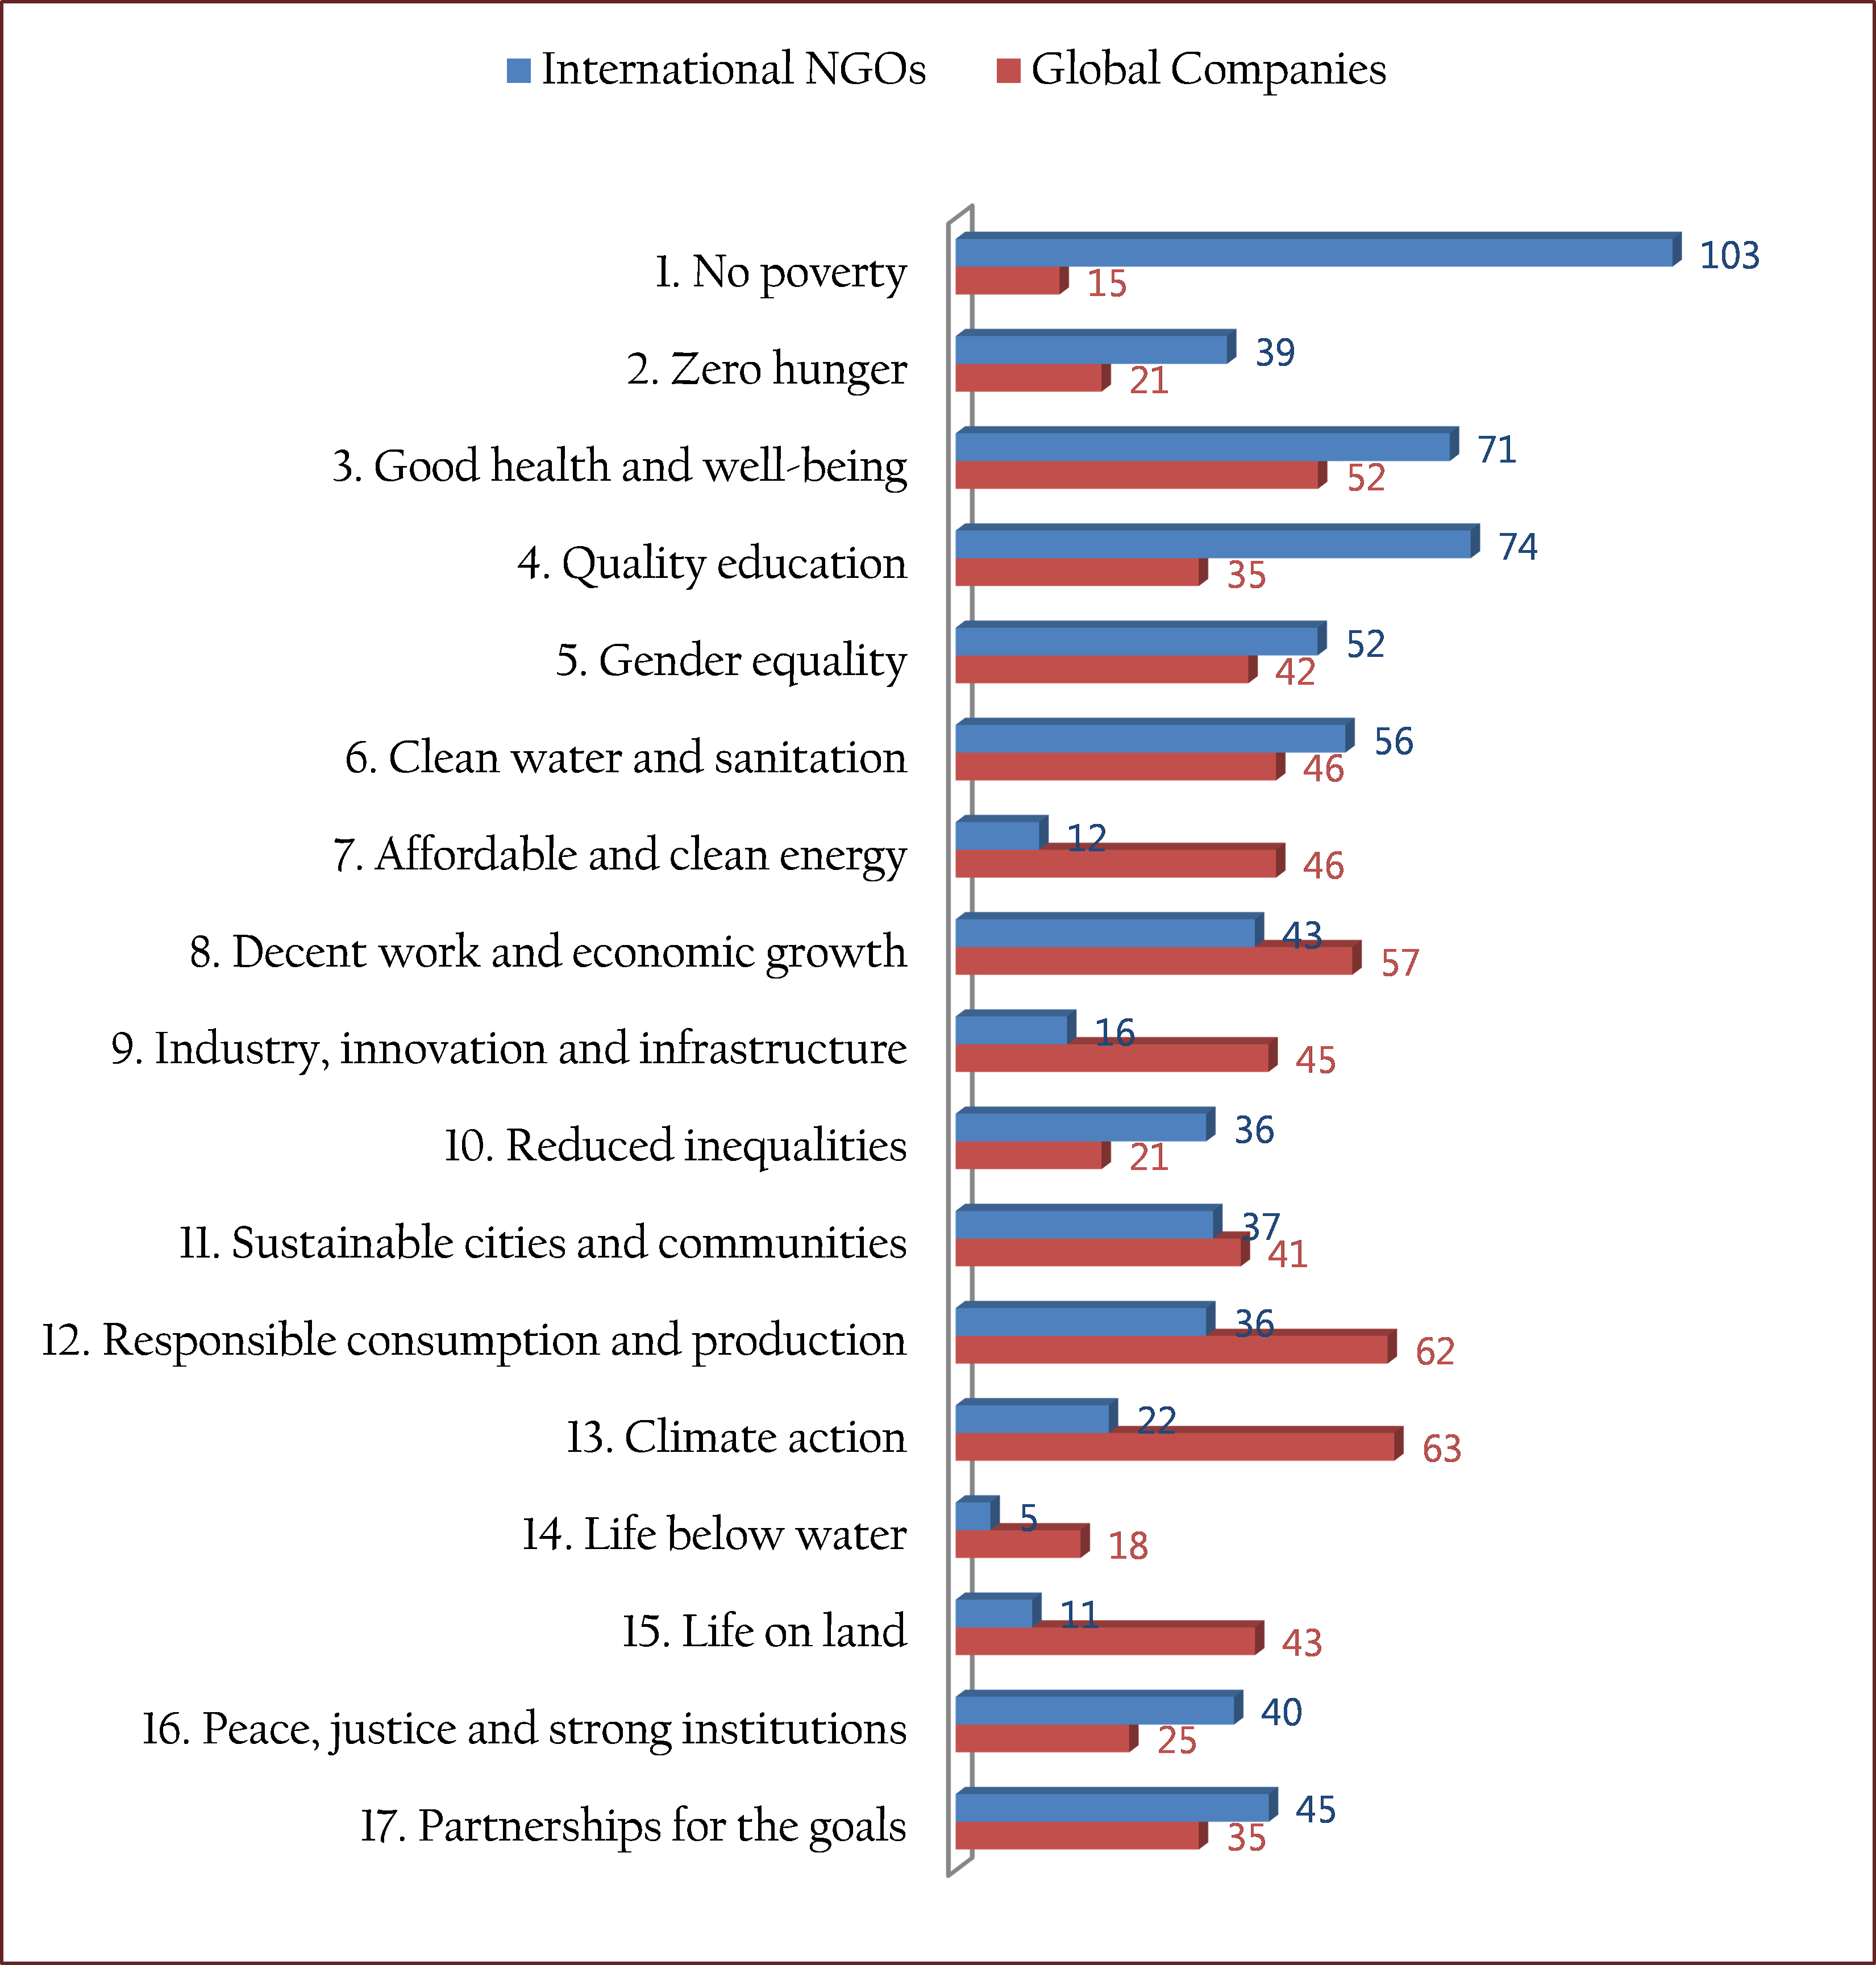 Figure 4. The SDGs Addressed by International NGOs and Emphasized by Global Companies